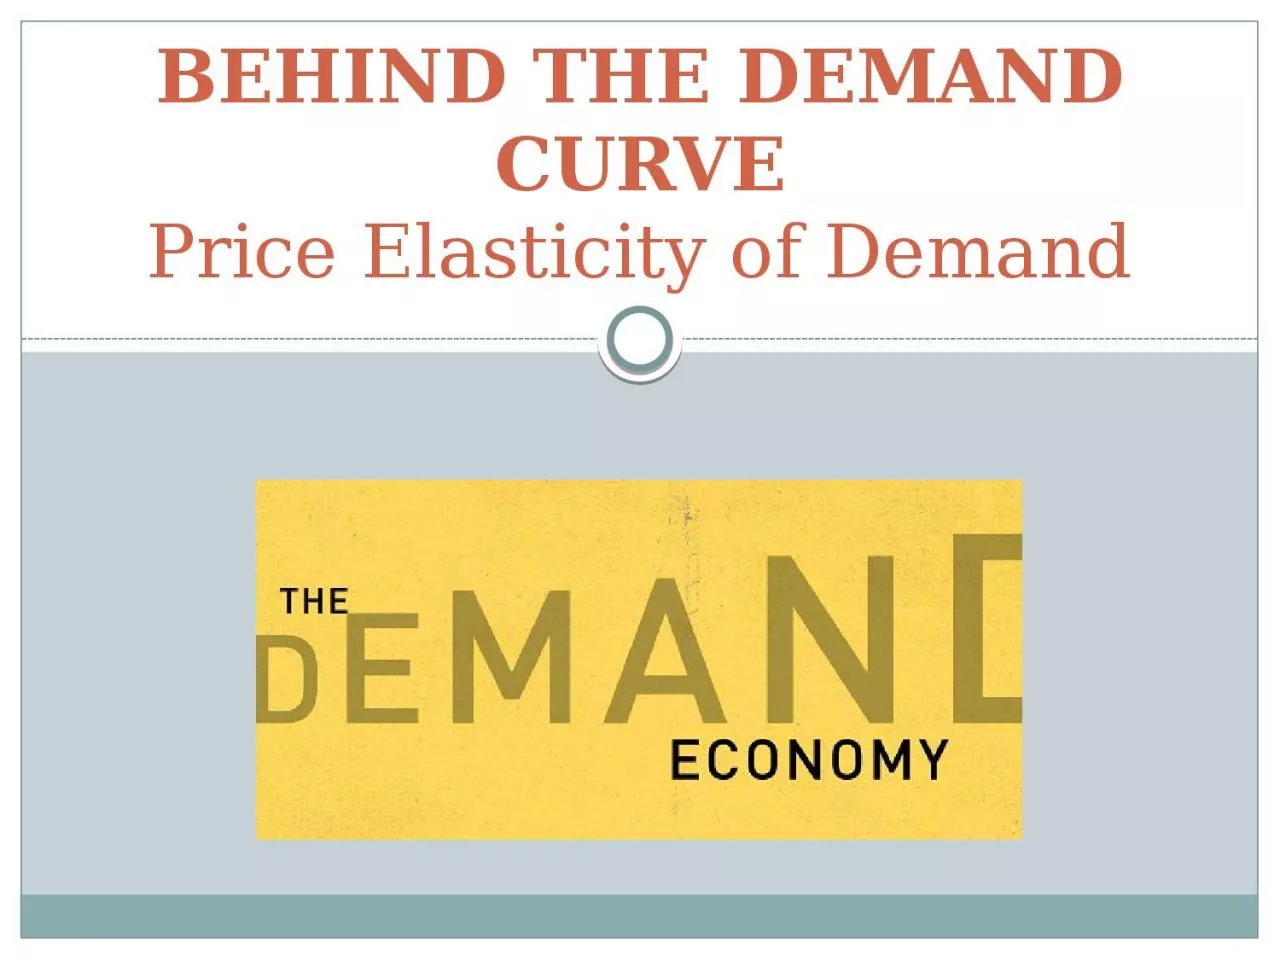 BEHIND THE DEMAND CURVE Price Elasticity of Demand